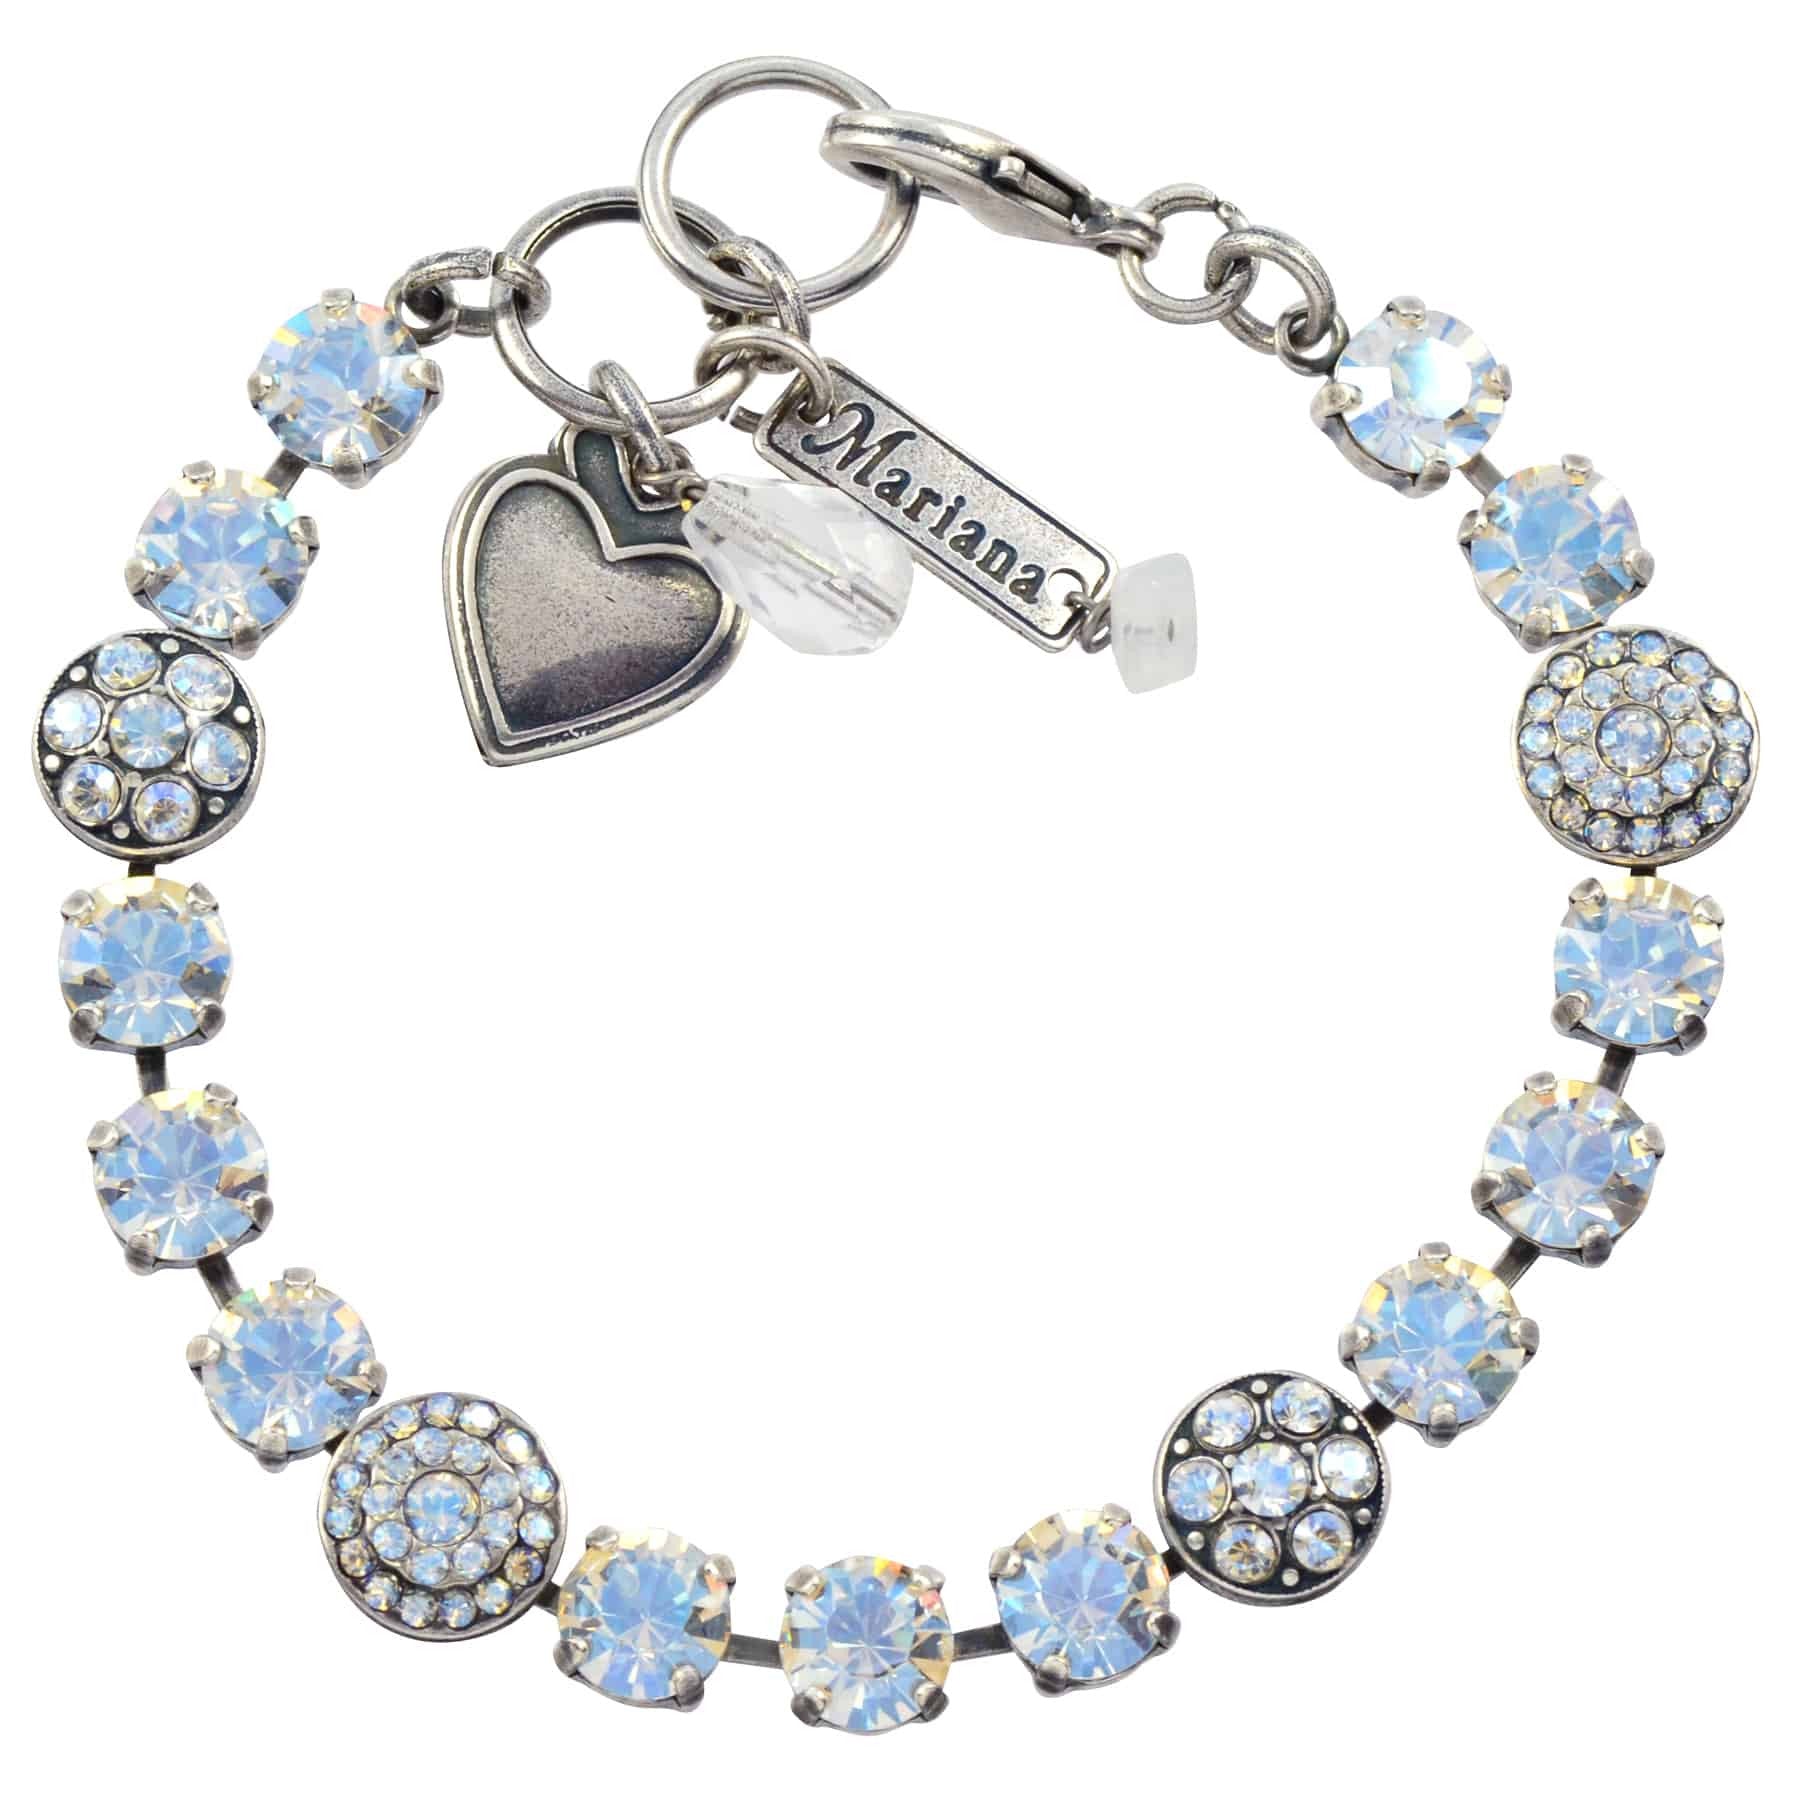 Mariana Jewelry Round Jewel Tennis Bracelet, Silver Plated with Moonlight crystal, 8 4044 001MOL